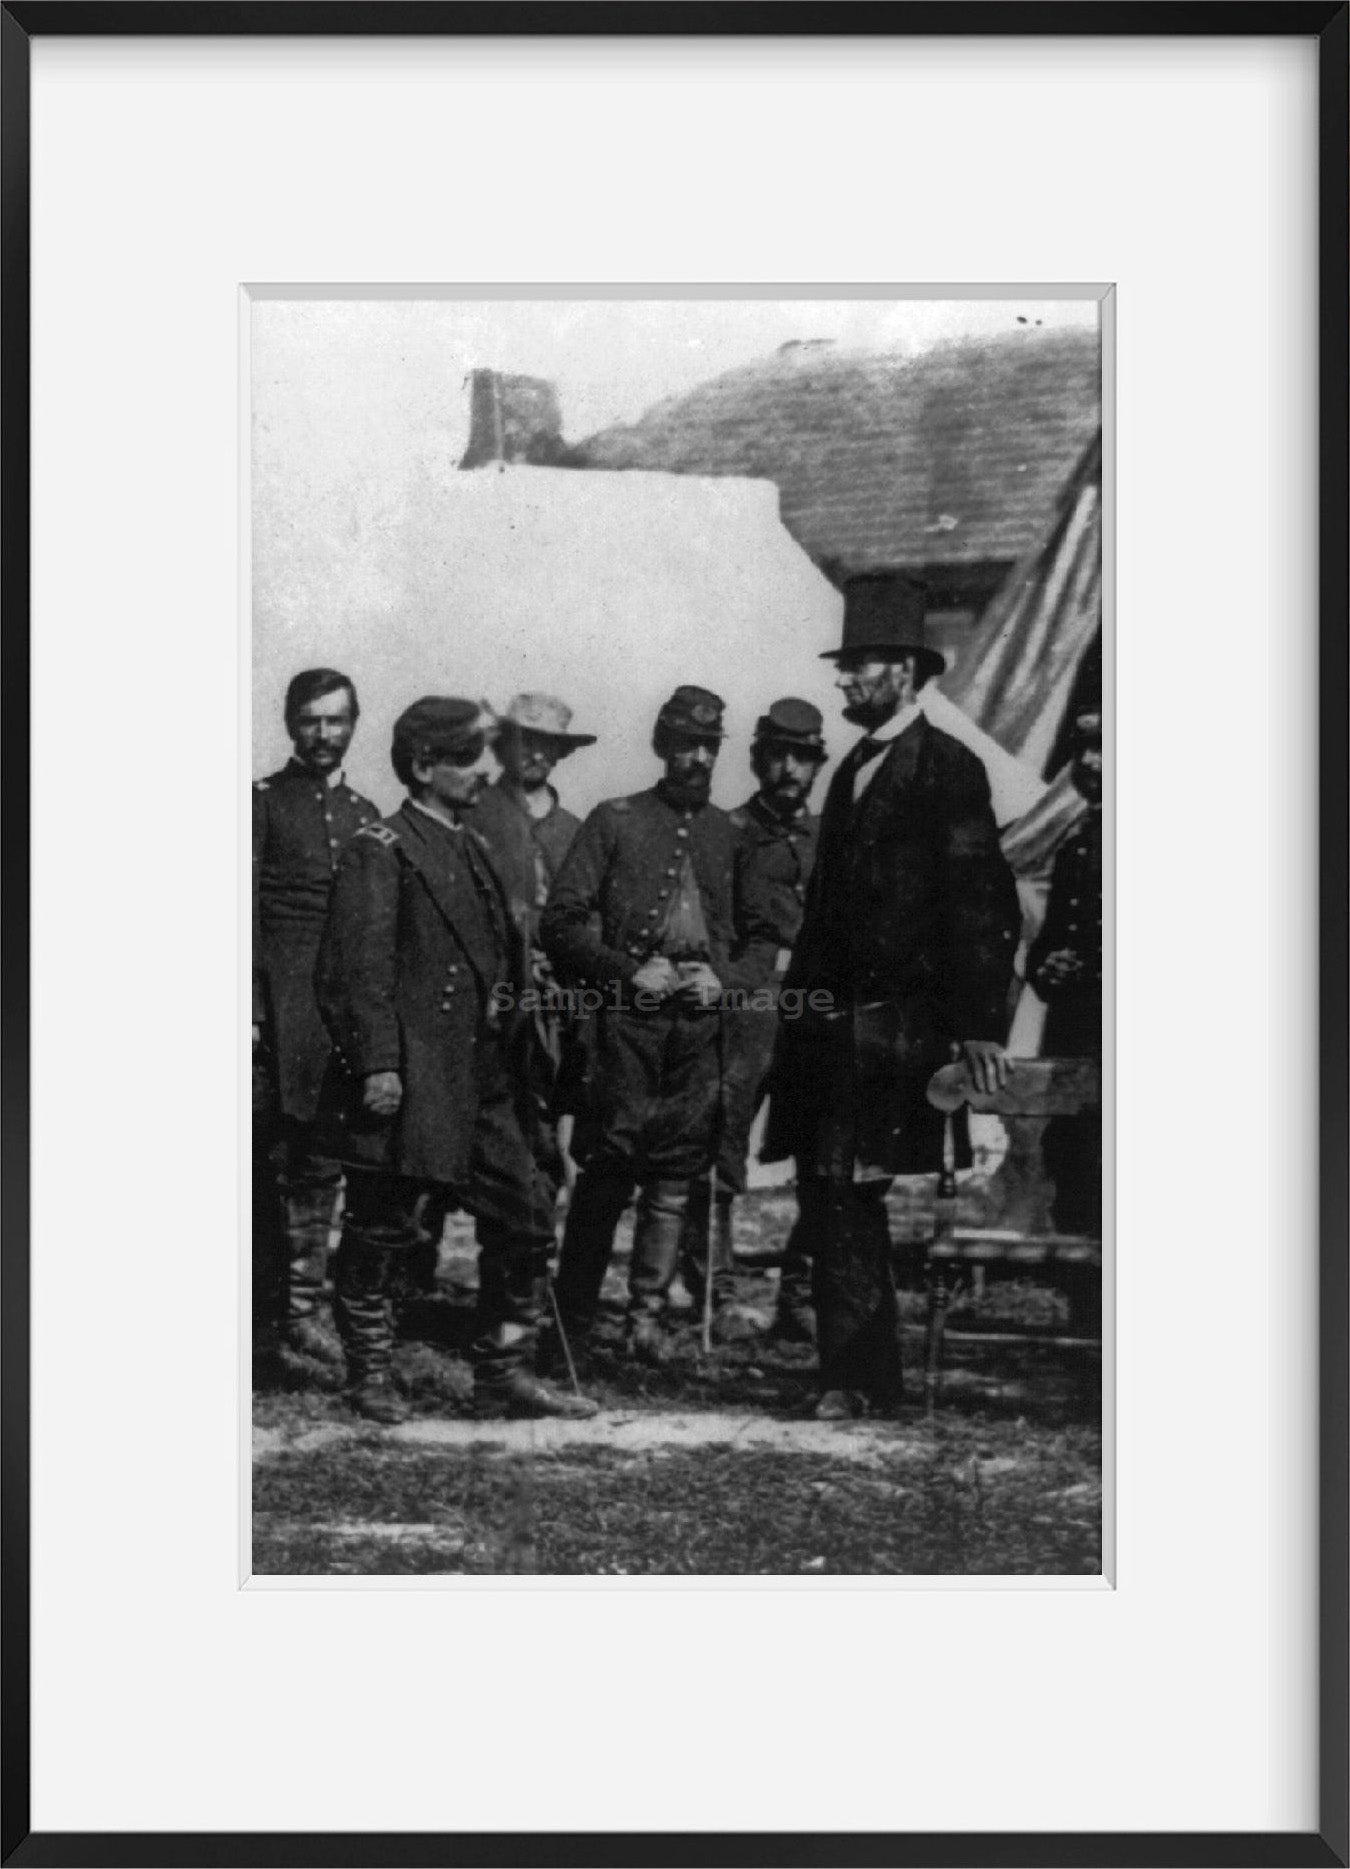 1862 Photo Abraham Lincoln on battlefield at Antietam, Maryland, cropped version